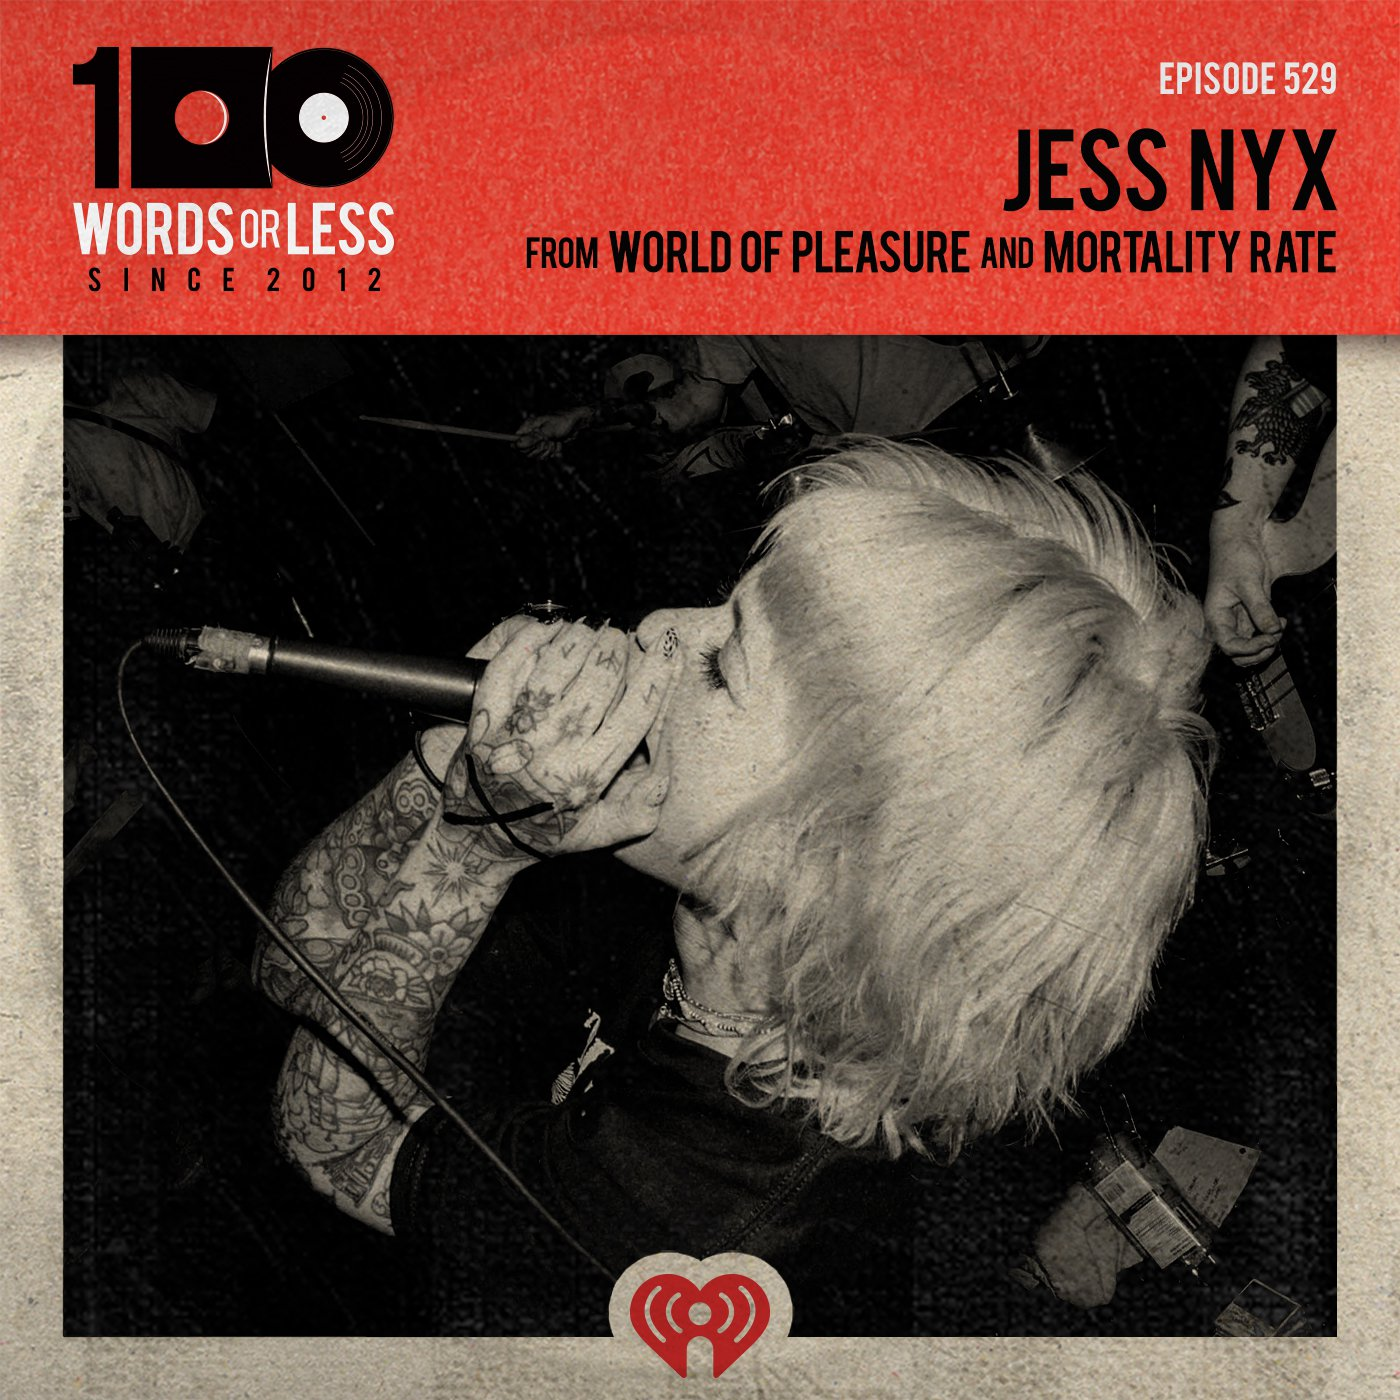 Jess Nyx from World of Pleasure & Mortality Rate